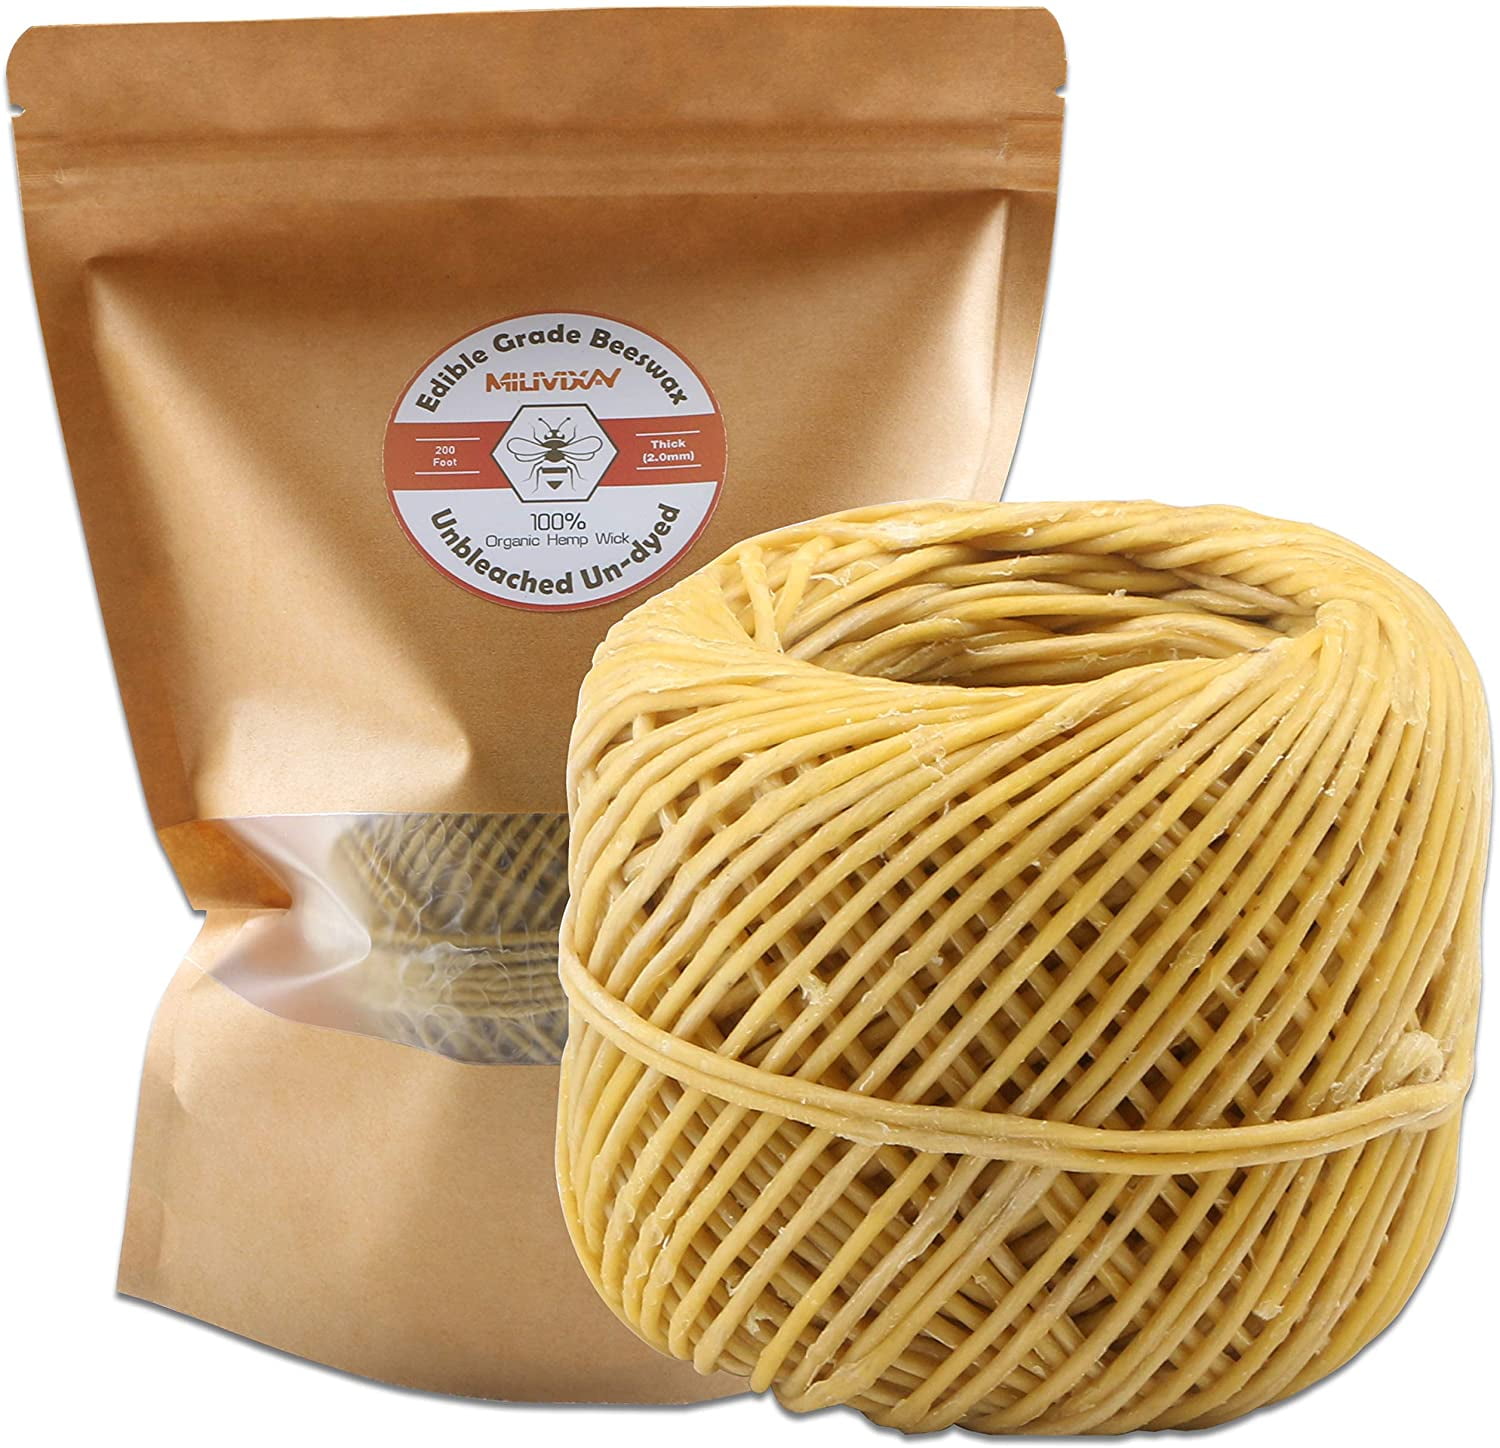 MILIVIXAY Thick Hemp Wick with Natural Beeswax Coating, Edible Grade  Beeswax, 200 FT Spool, Thick Size (2.0mm),Unbleached, Un-dyed and 100%  Organic